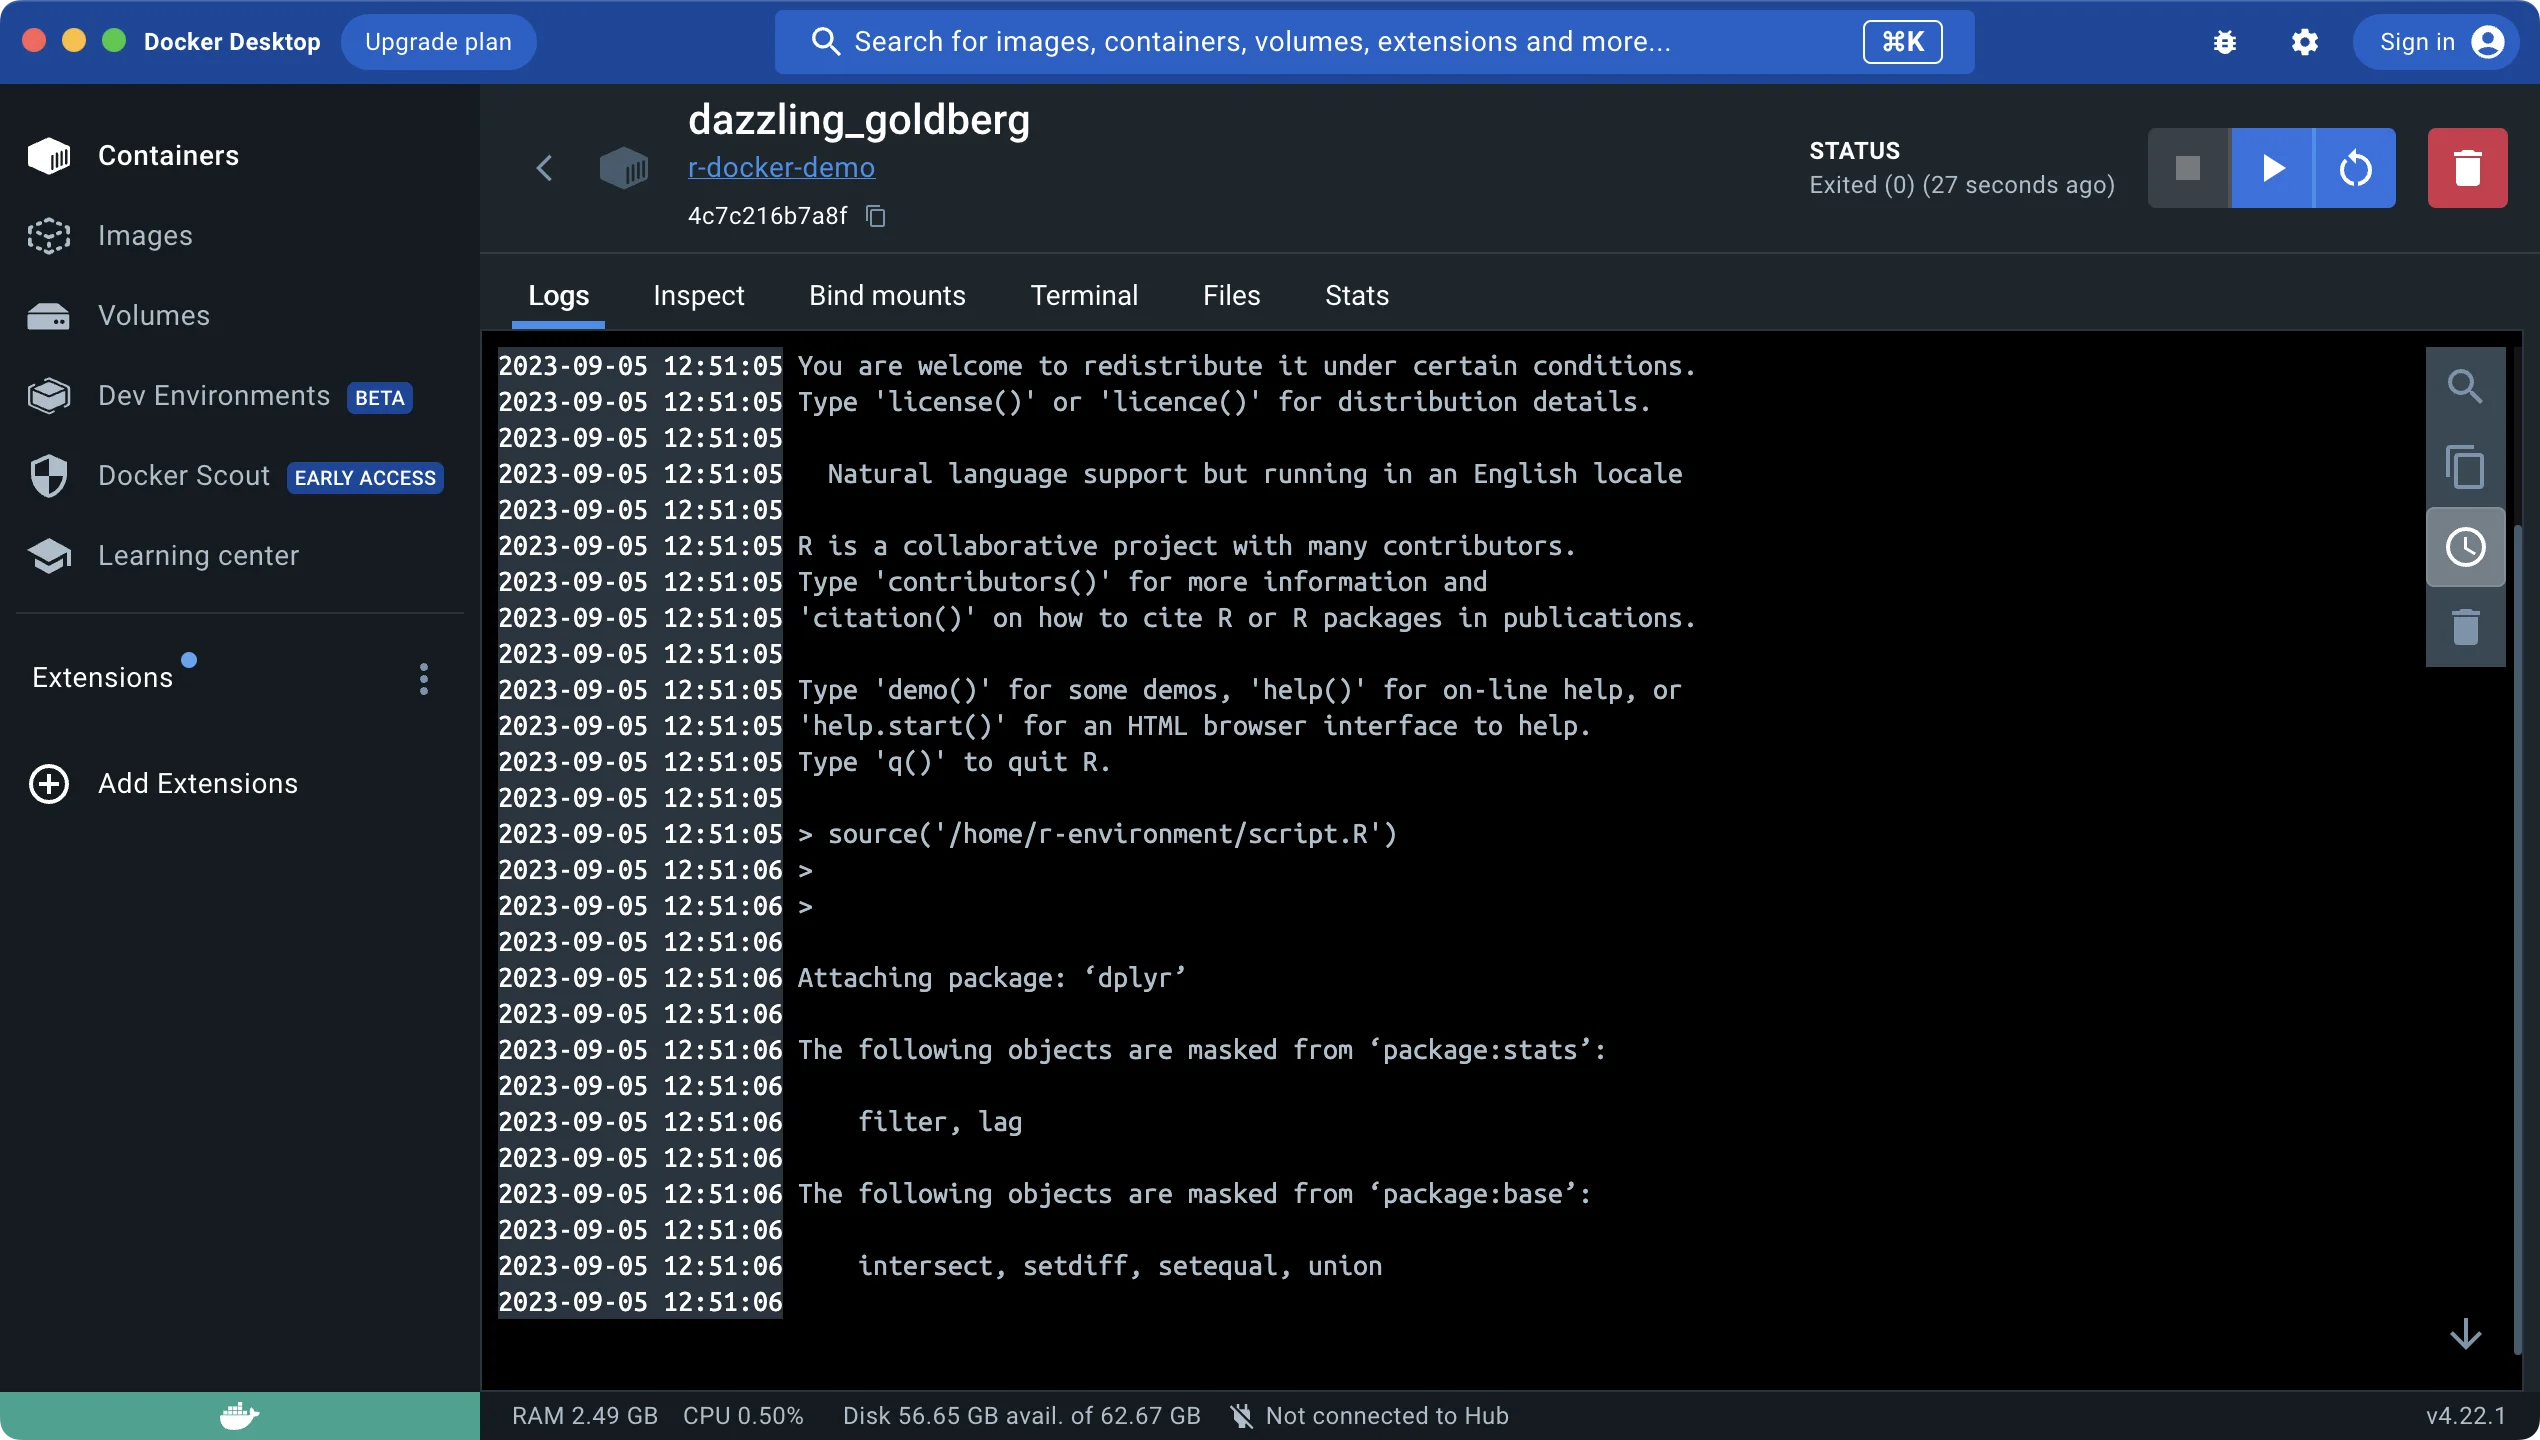 Image 6 - Docker container log output